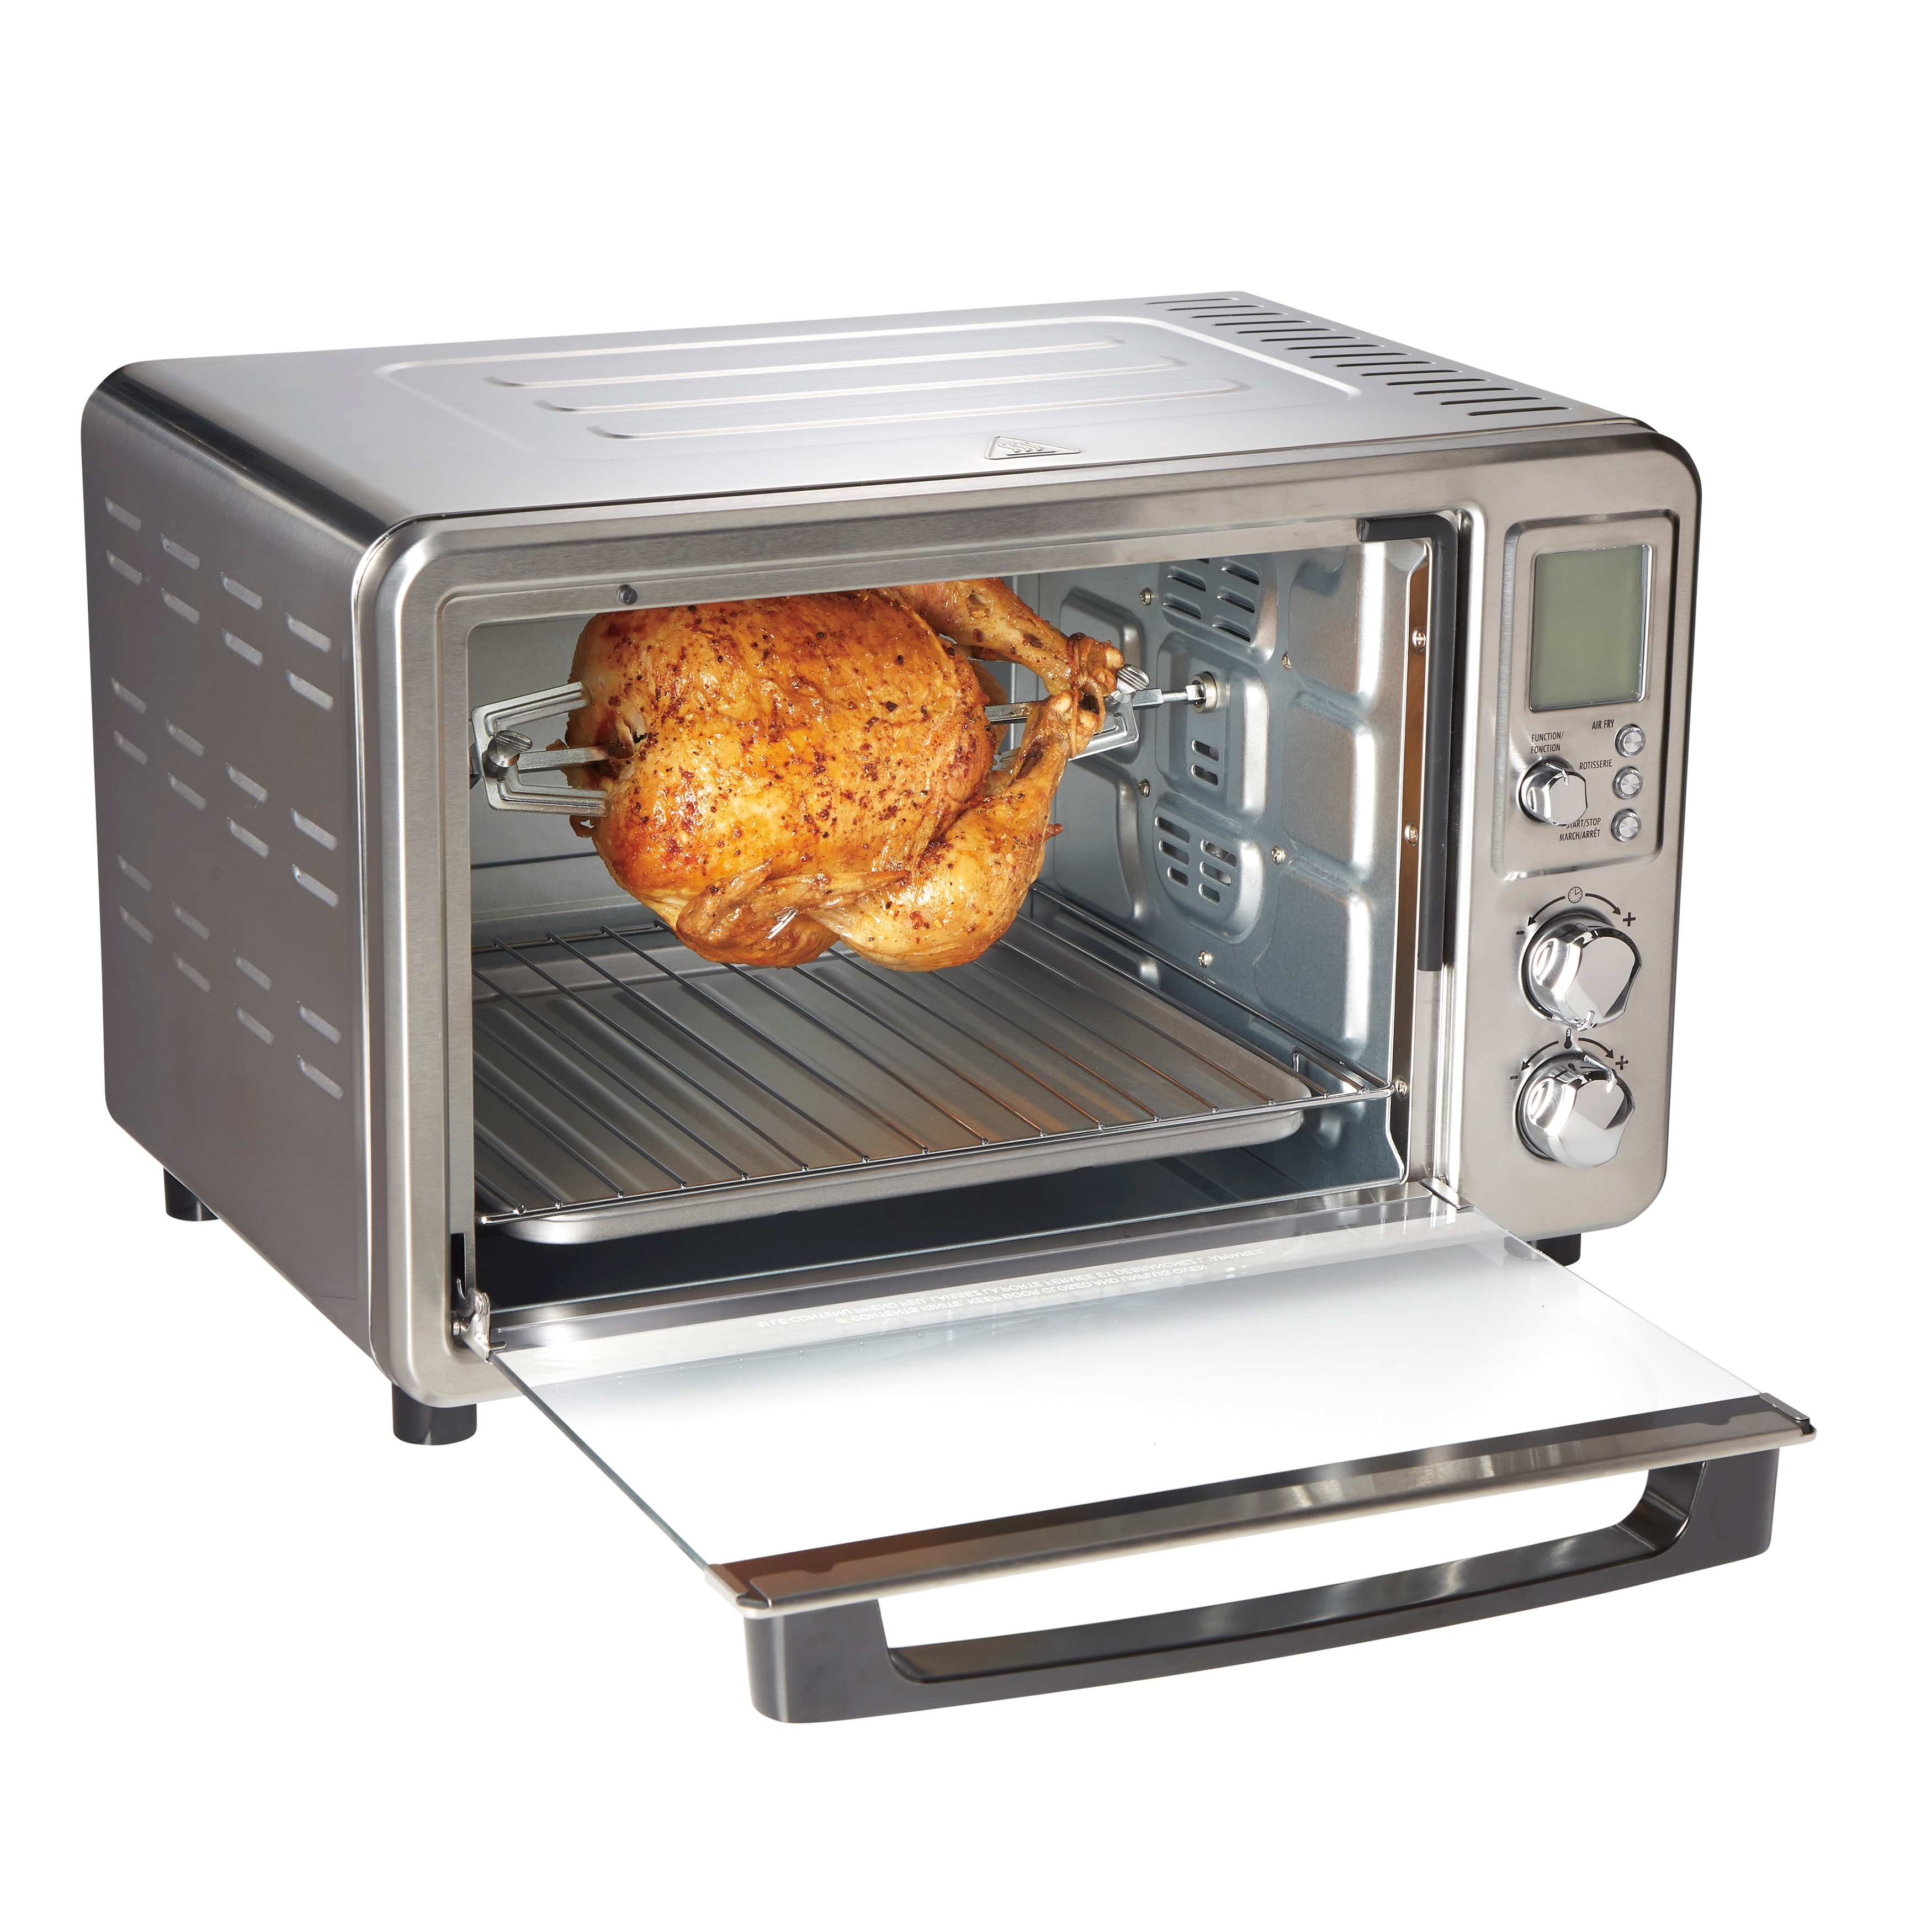 https://ak1.ostkcdn.com/images/products/is/images/direct/52f8fa3b55729e9a0b6623bef9ac36e2c046db12/Hamilton-Beach-Sure-Crisp-Digital-Air-Fryer-Toaster-Oven-with-Rotisserie-6-Slice-Capacity.jpg